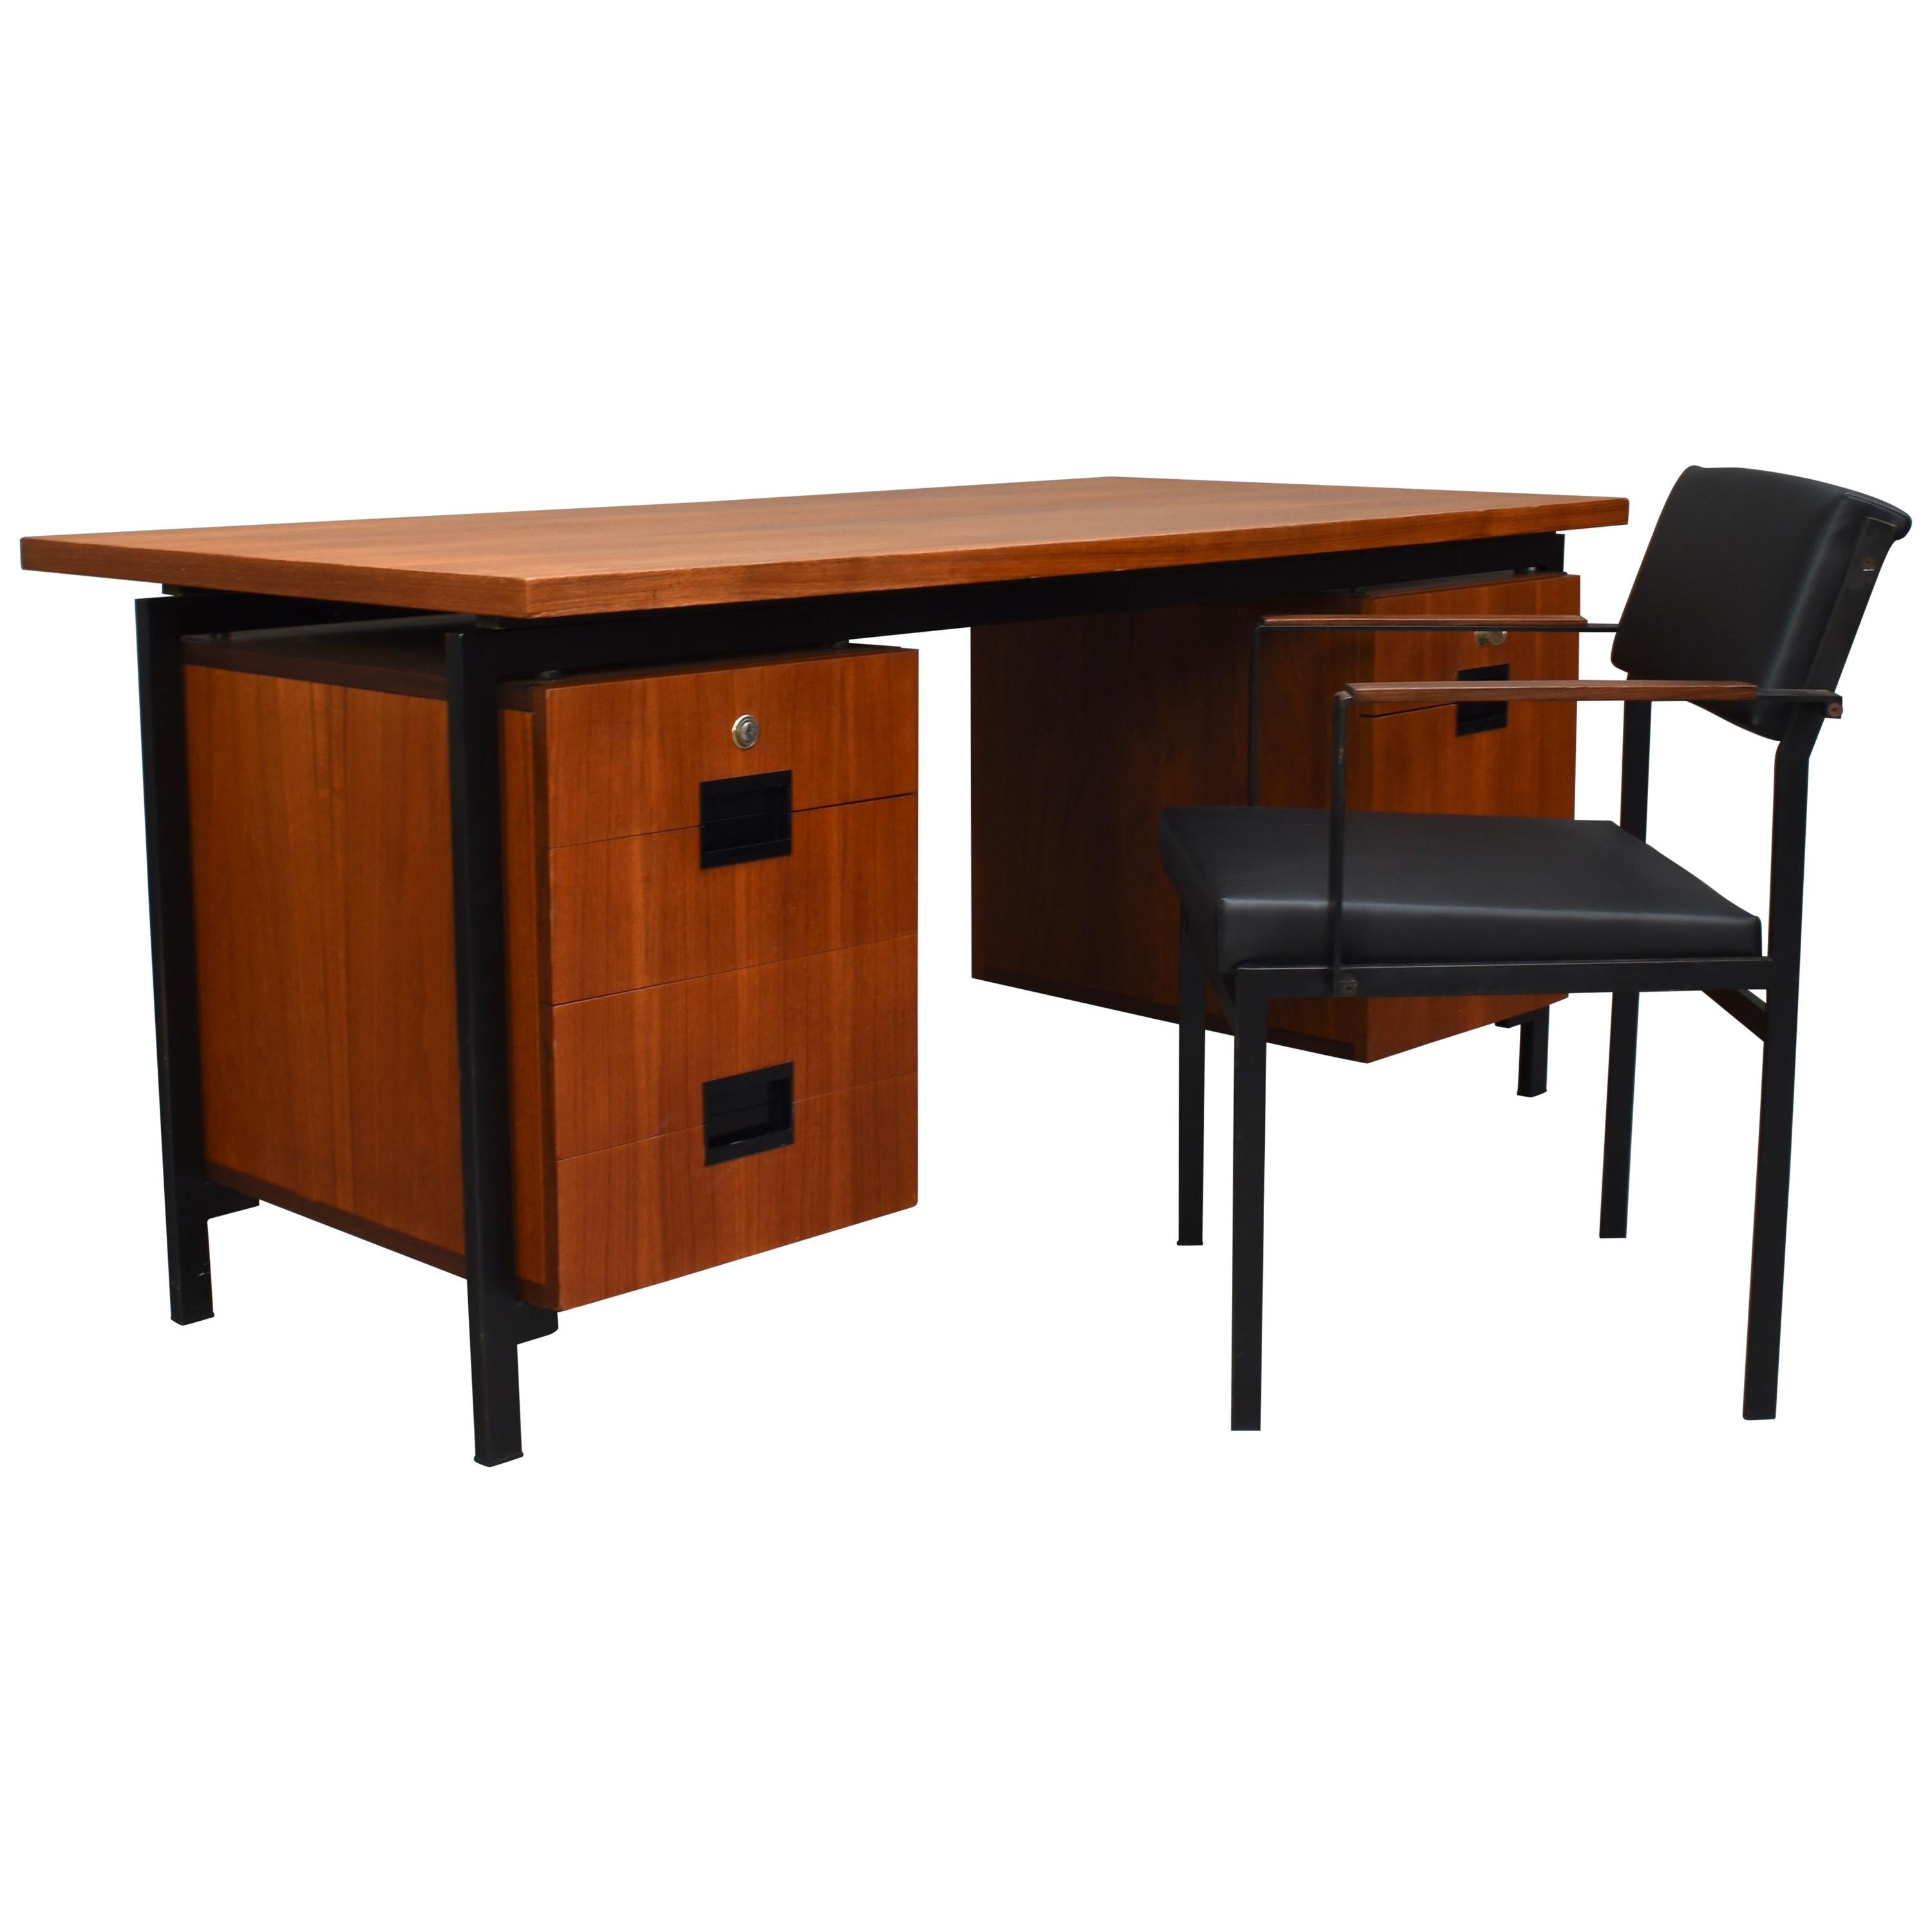 Cees Braakman for Pastoe Model EU02 Japanese Series Desk and Chair in Teak, 1950 For Sale